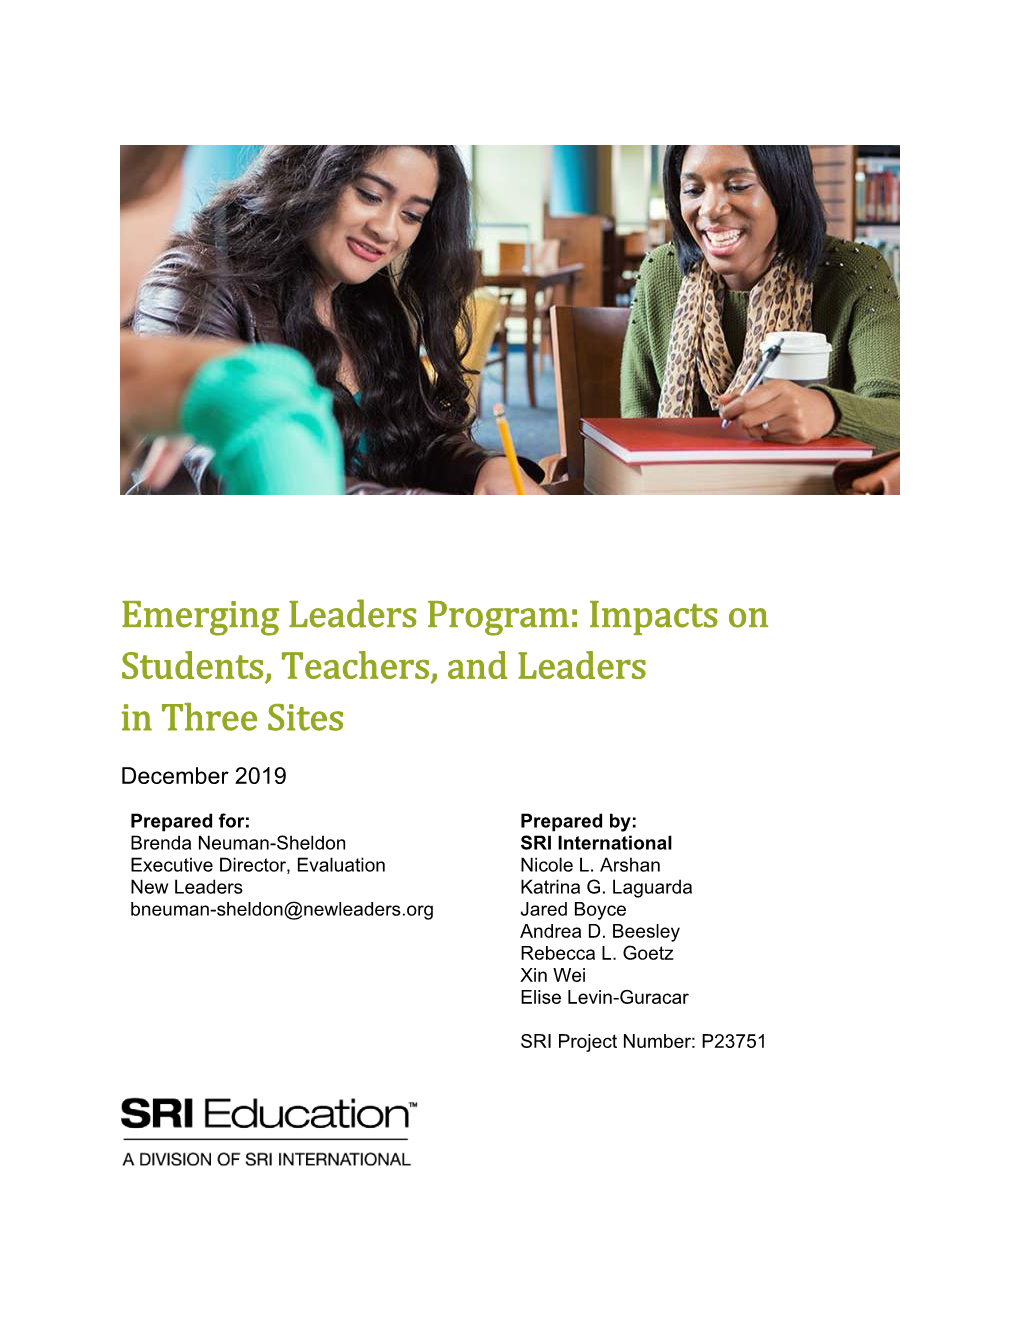 Emerging Leaders Program: Impacts on Students, Teachers, and Leaders in Three Sites